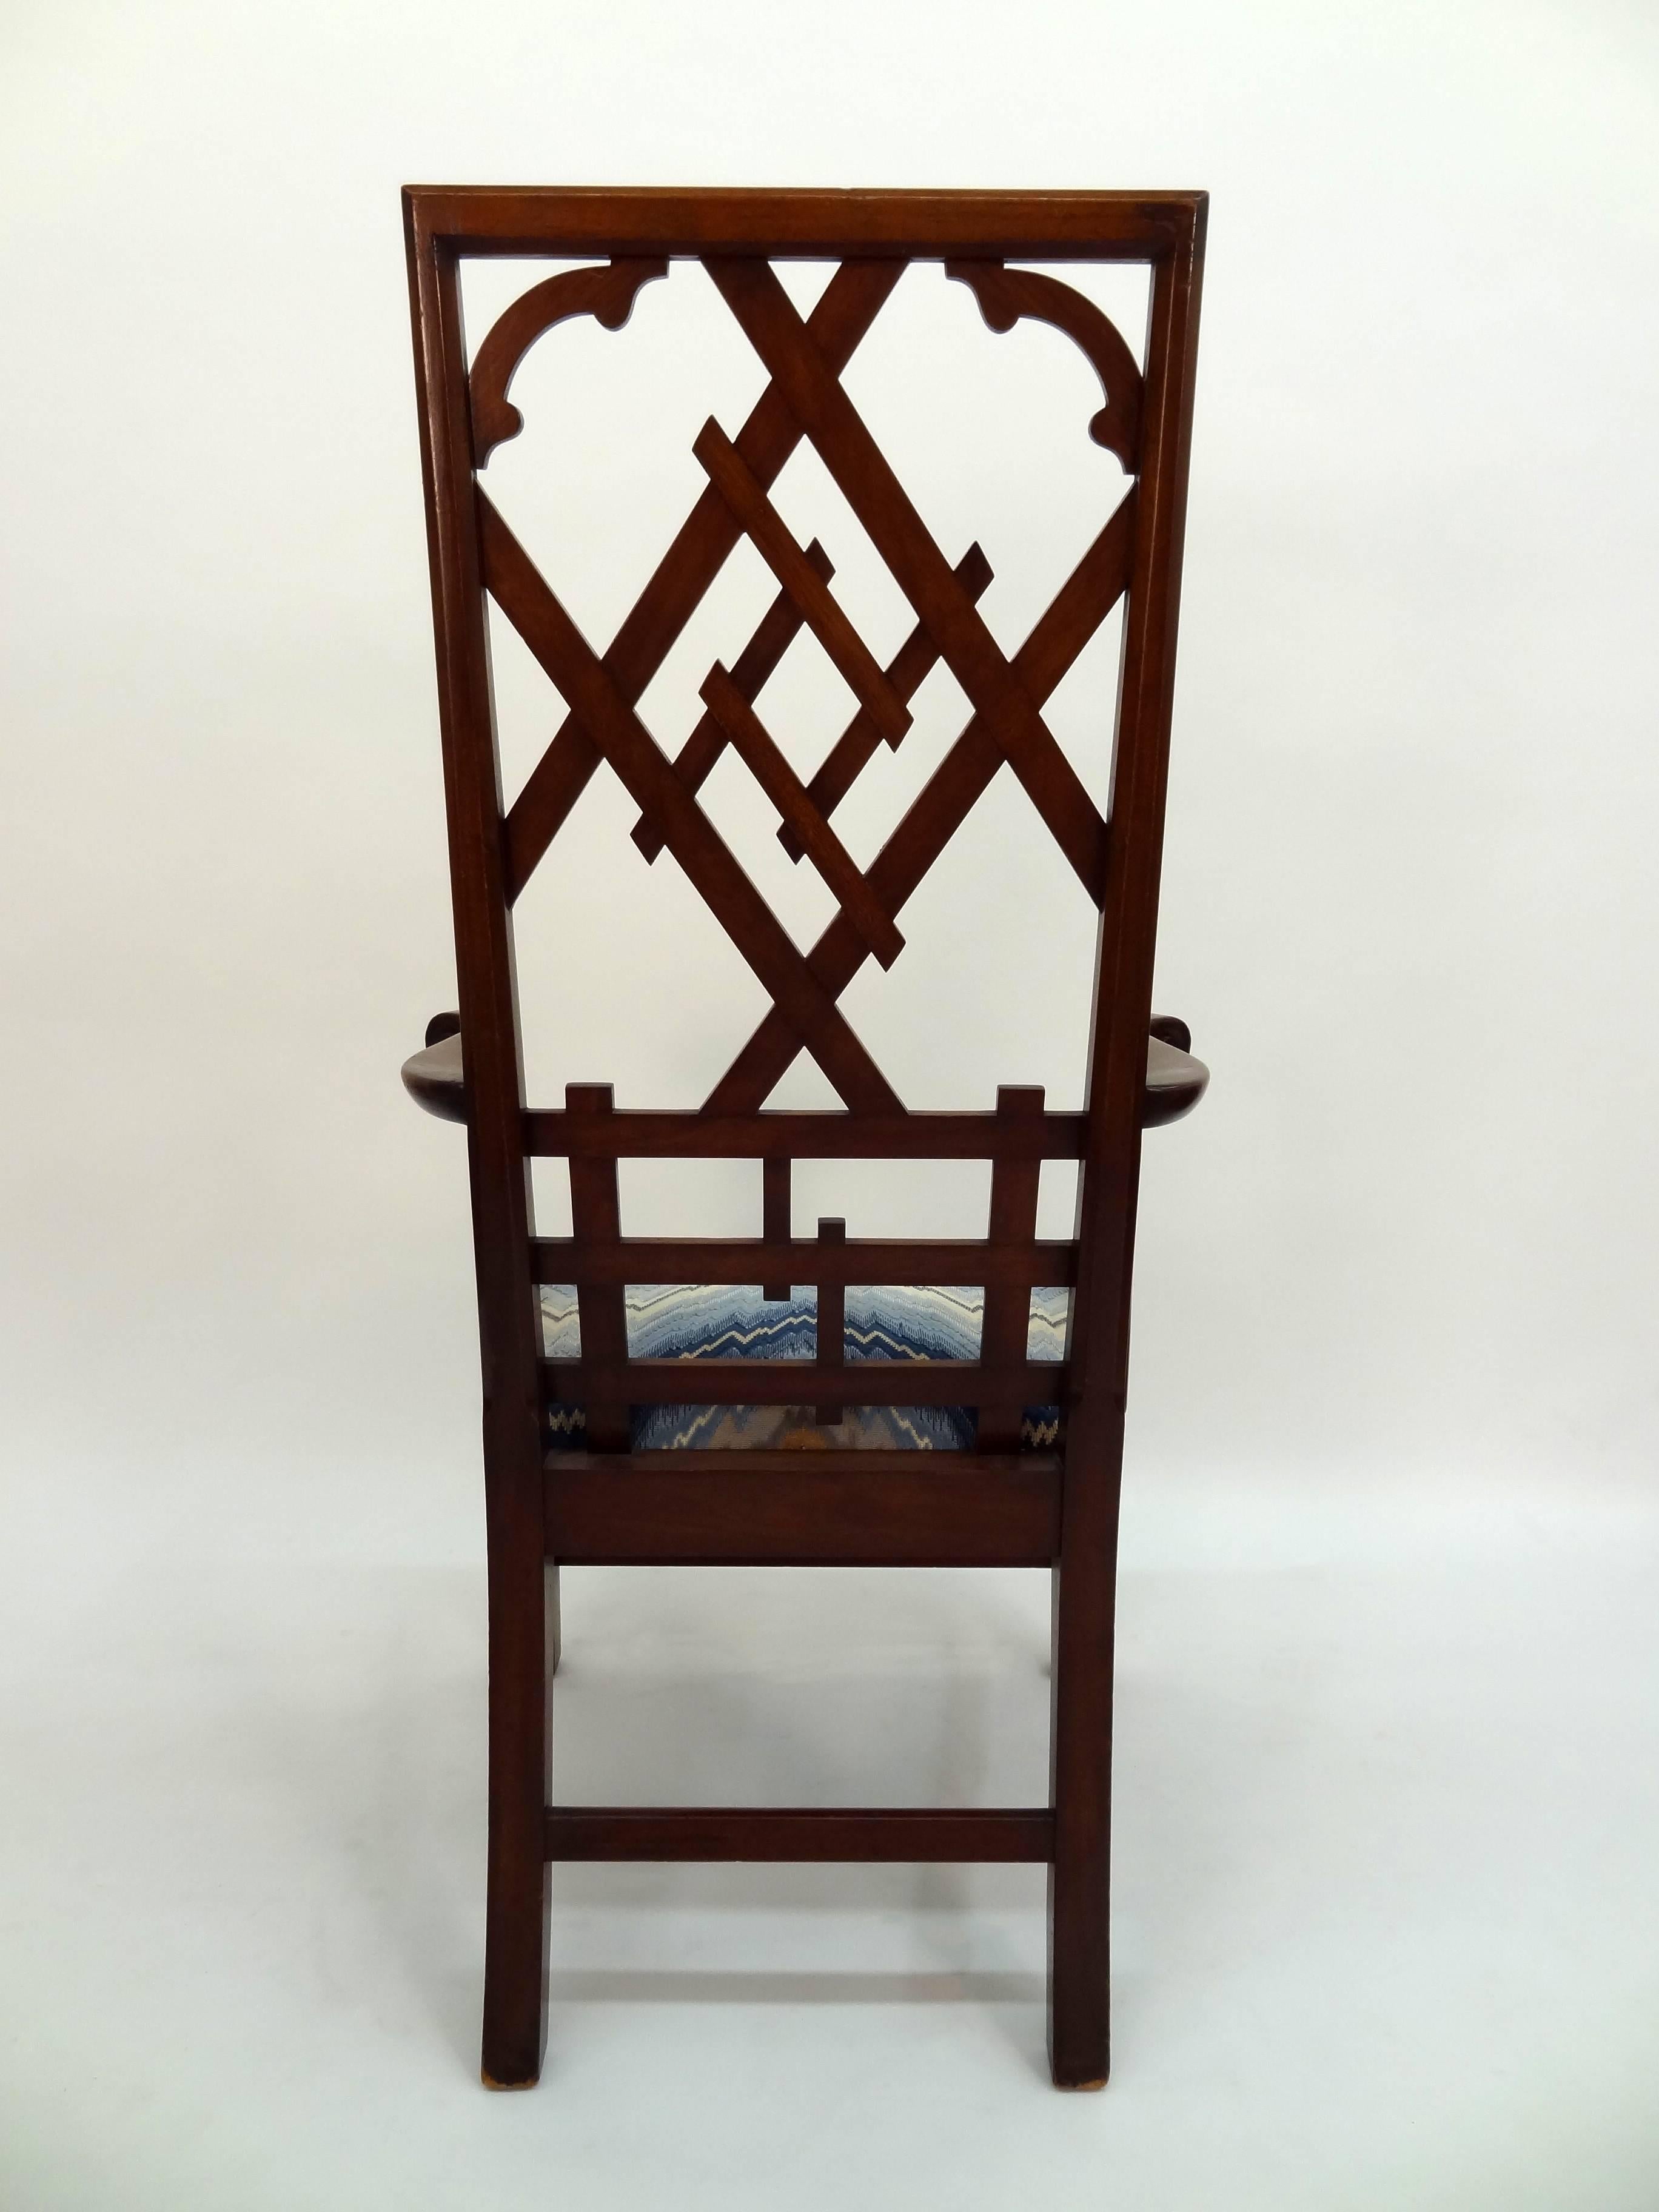 Contemporary Chippendale Style Fretwork High Back Chair For Sale